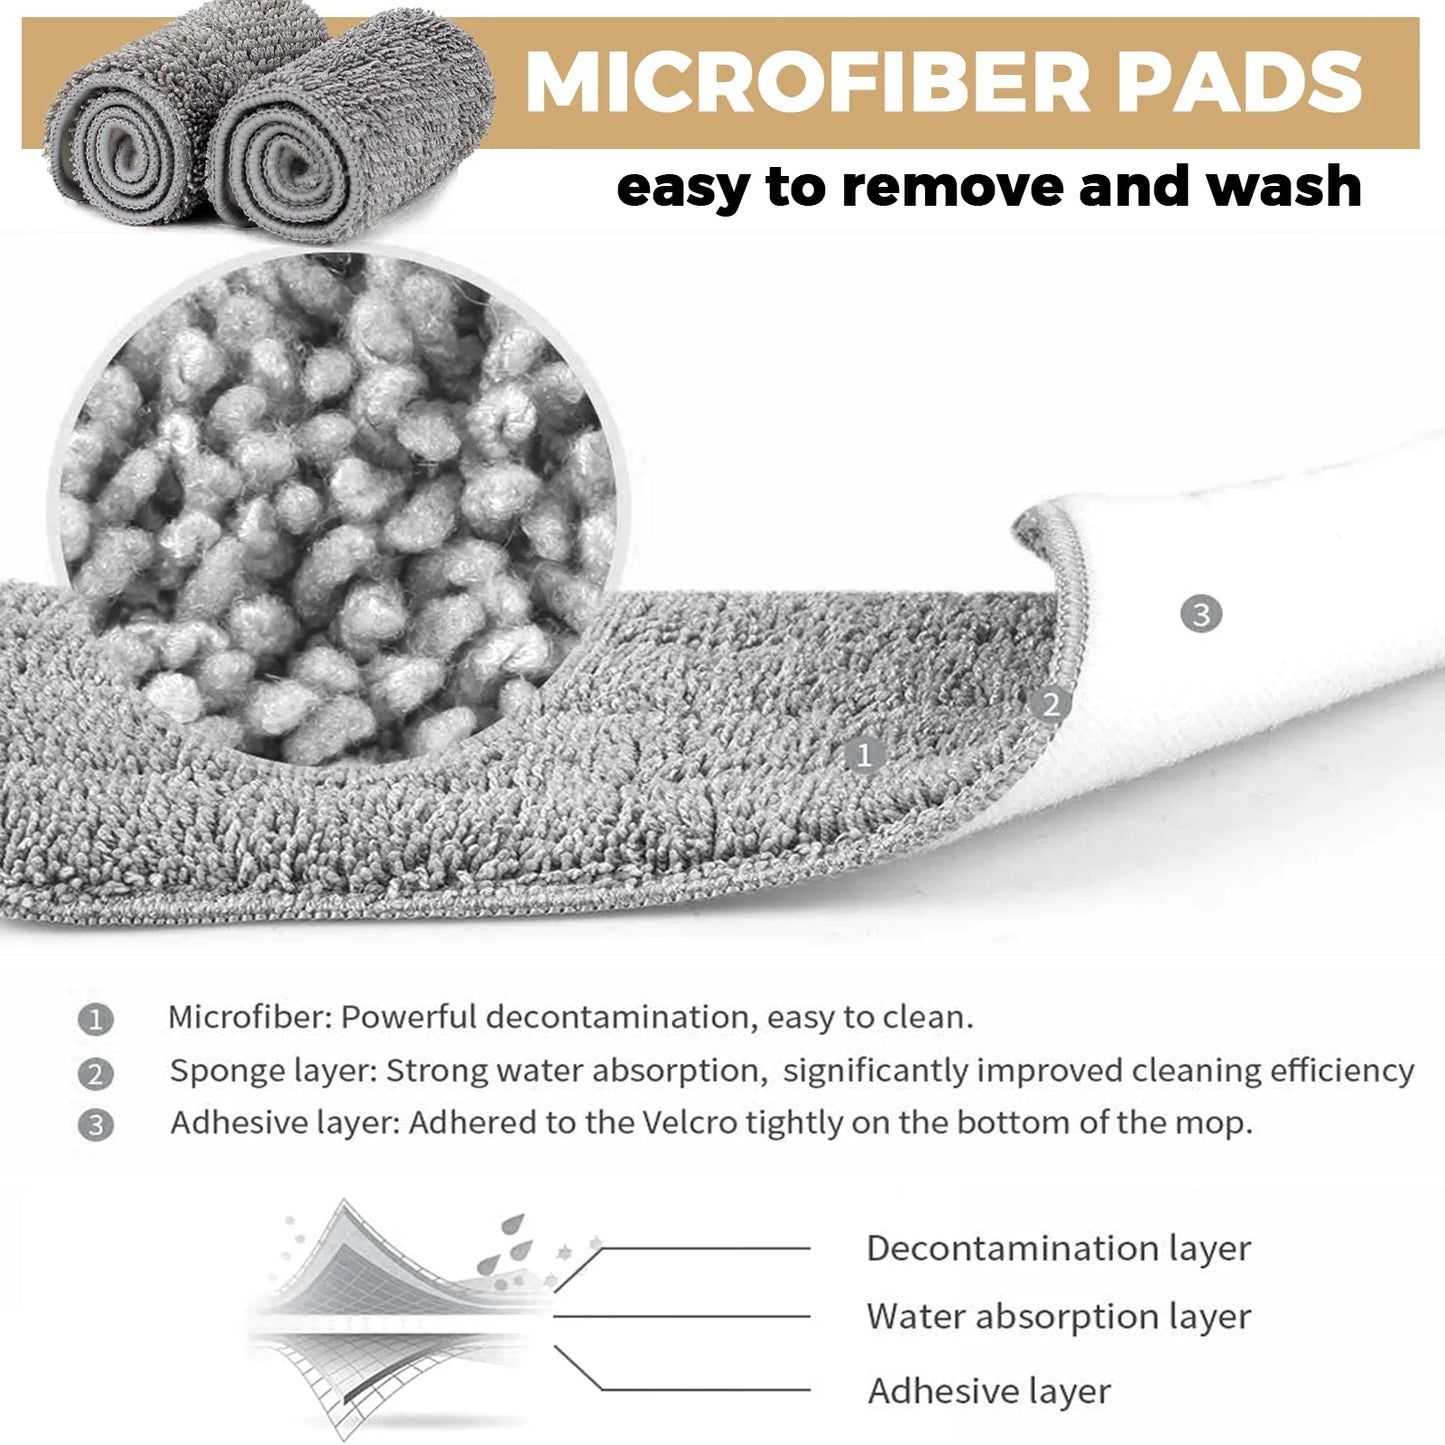 360° Spin & Spray Mop: Clean with Ease